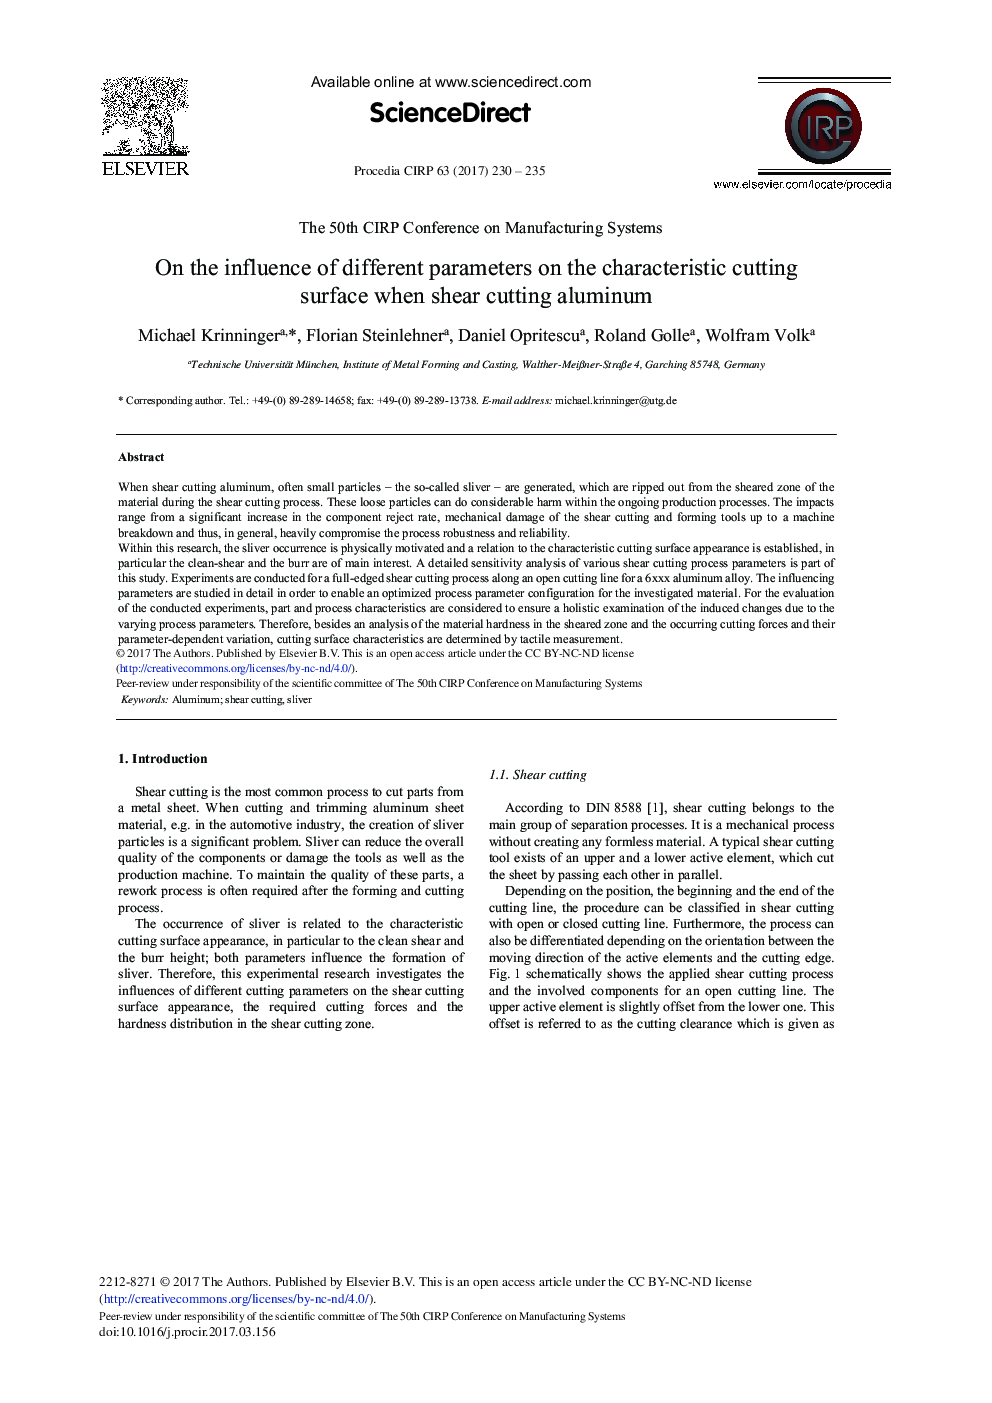 On the Influence of Different Parameters on the Characteristic Cutting Surface when Shear Cutting Aluminum